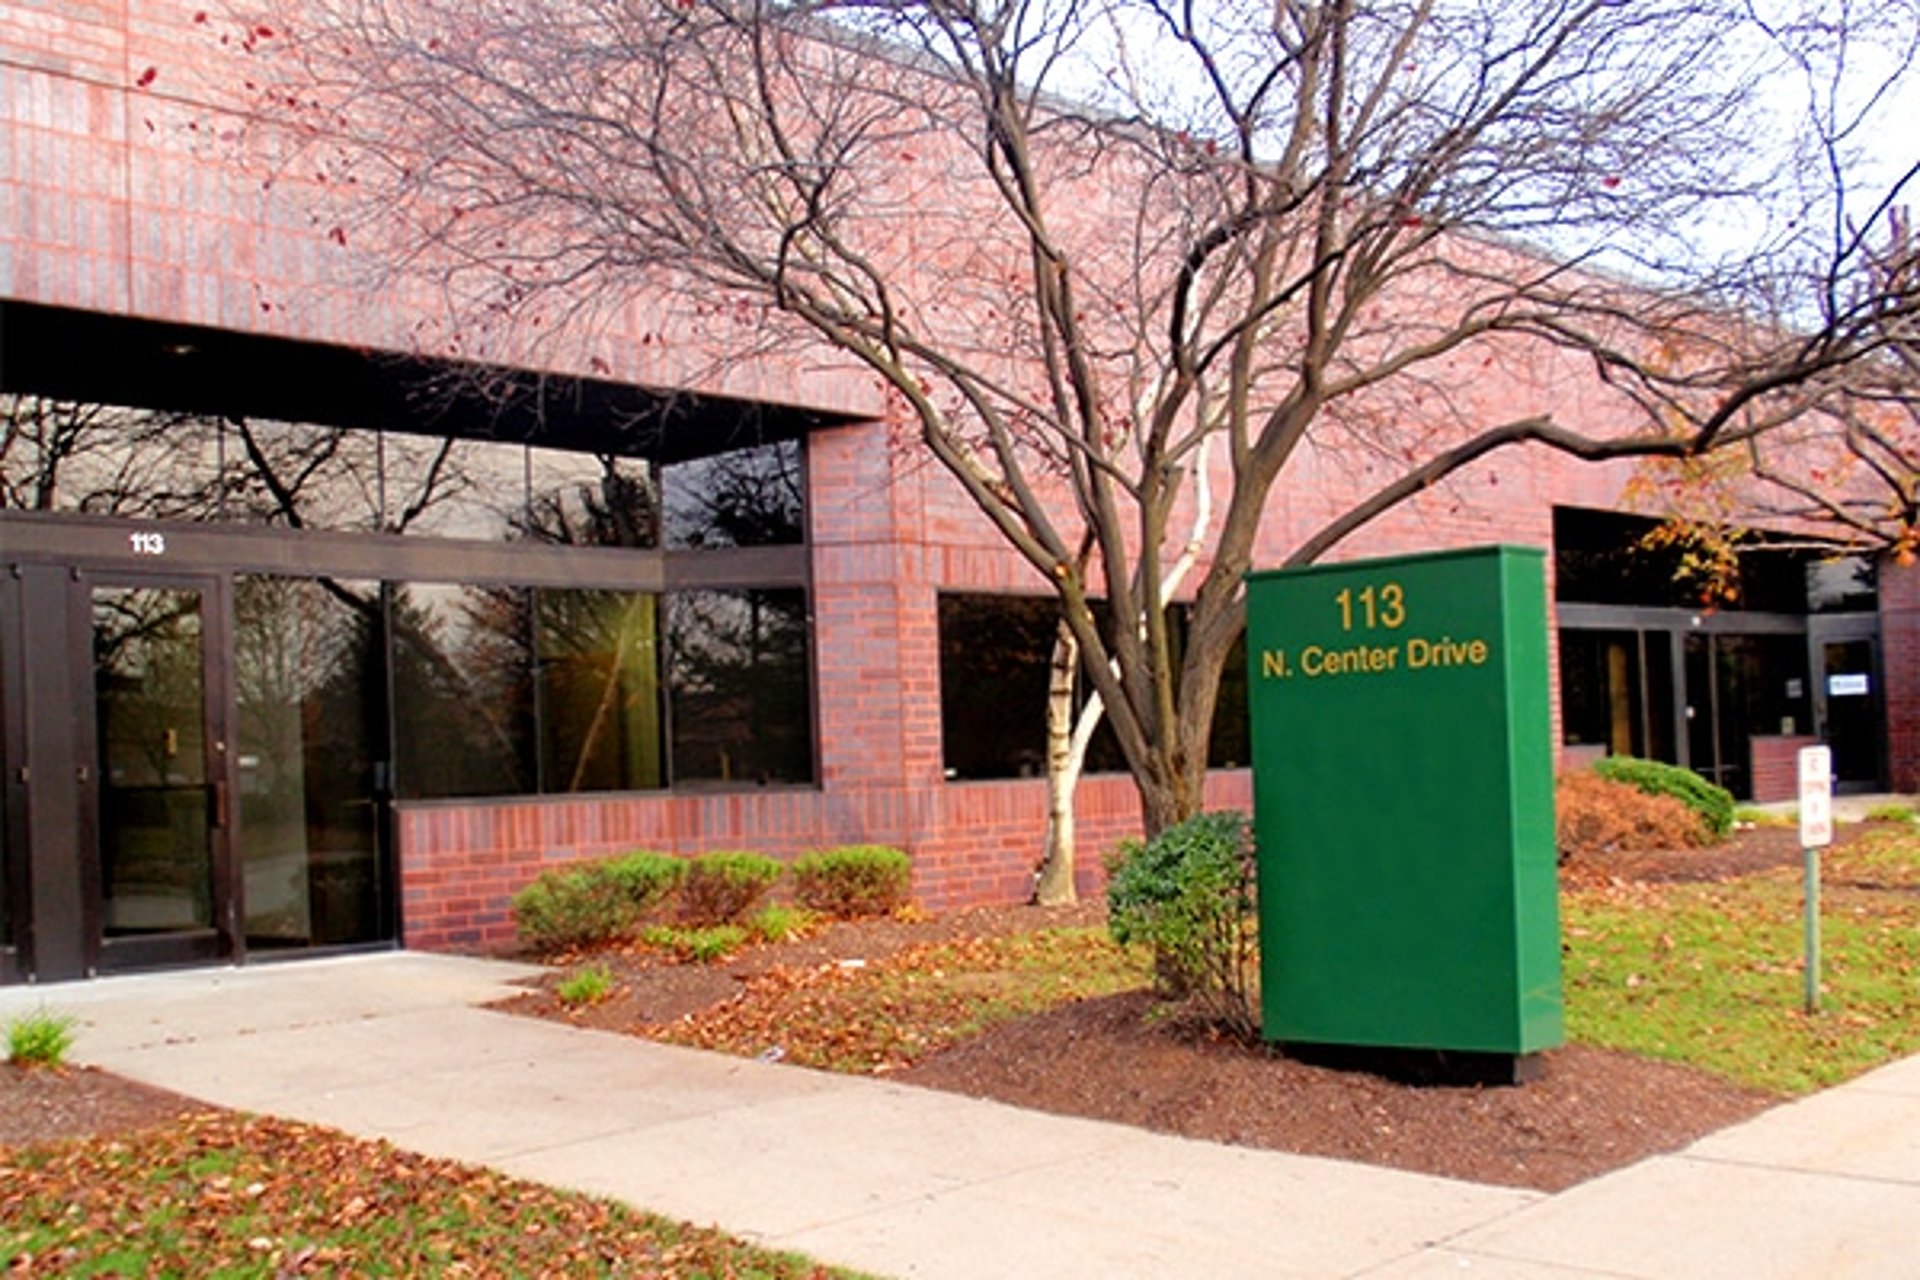 The front glass entrance of a long brick building with a winter tree with no leaves and a large green sign outside